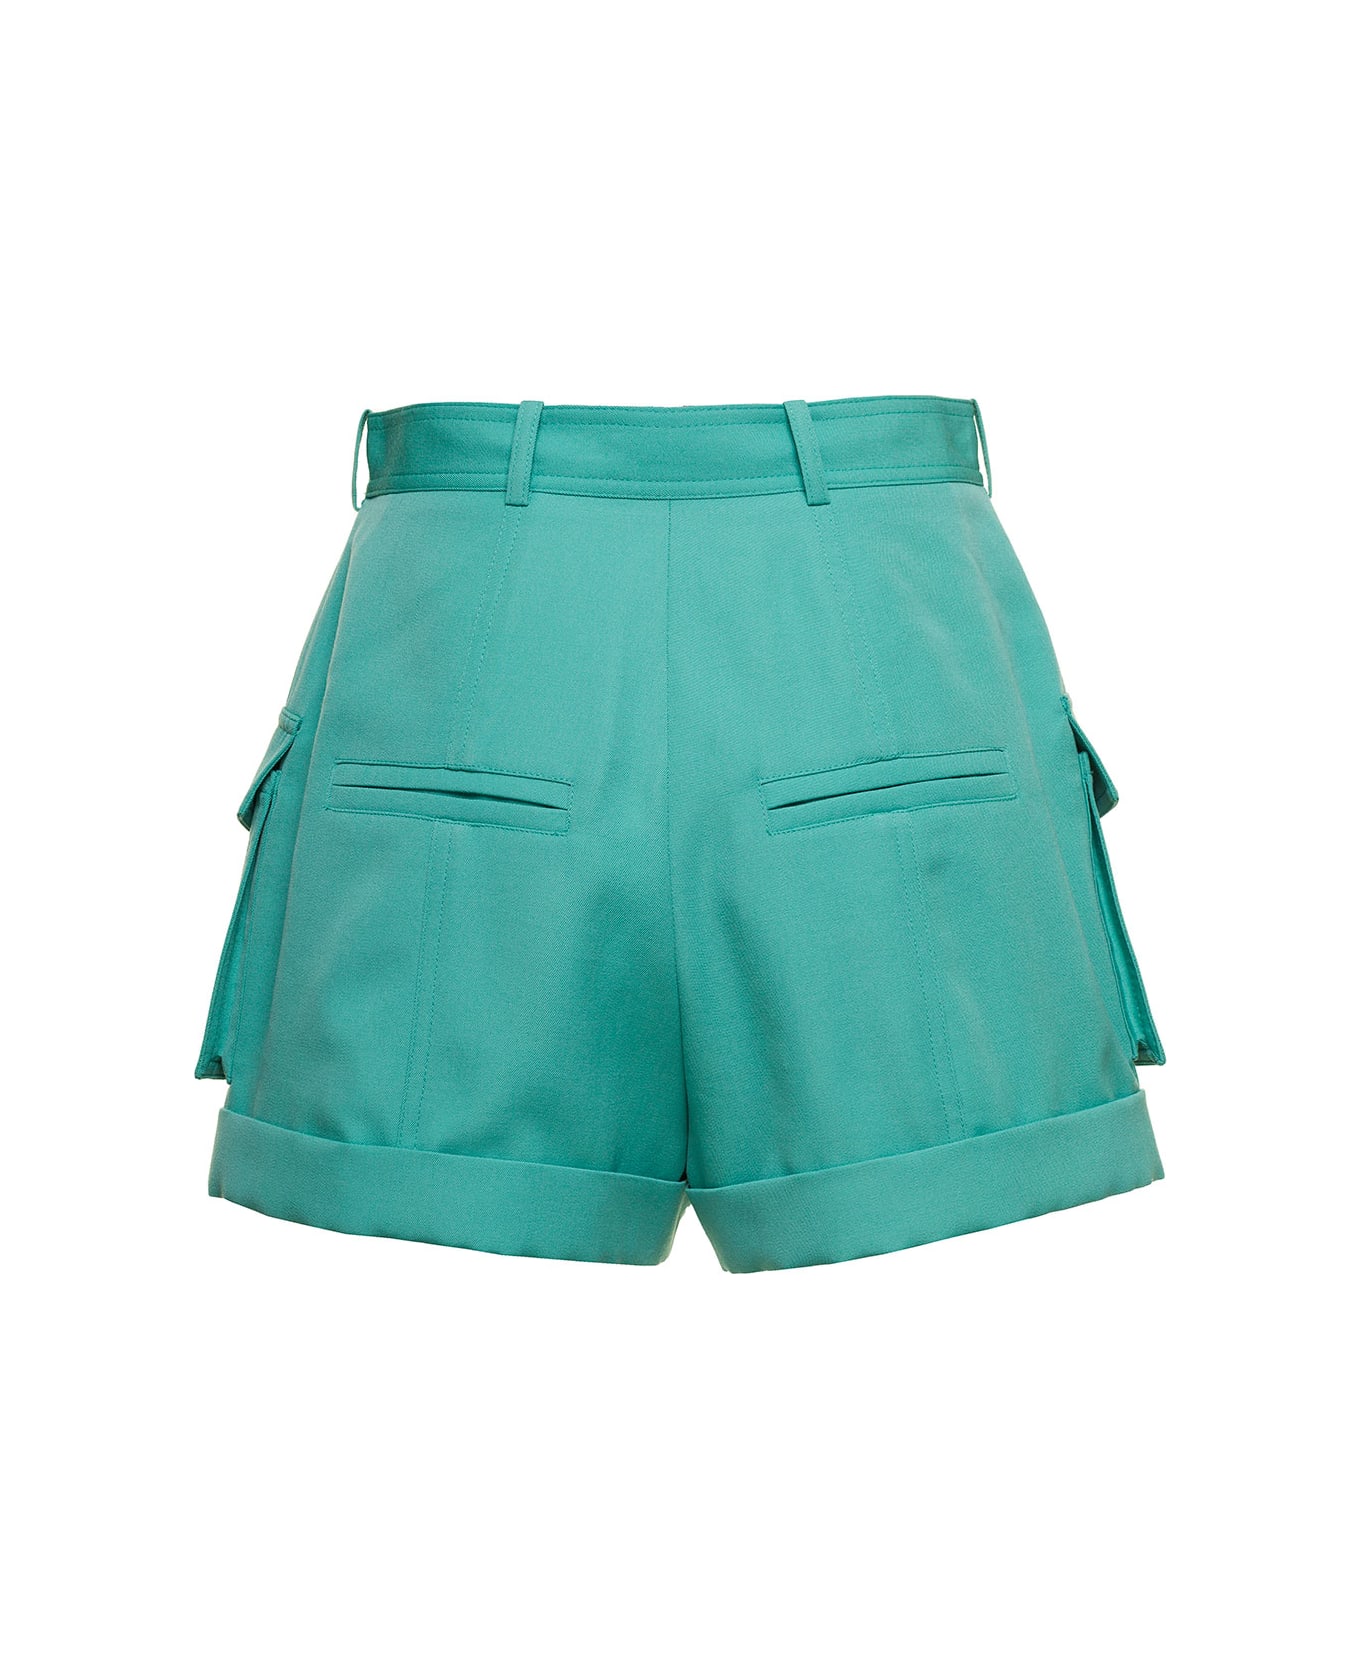 Balmain Light Blue Shorts With Cuff And Jewel Buttons In Wool Woman - Green